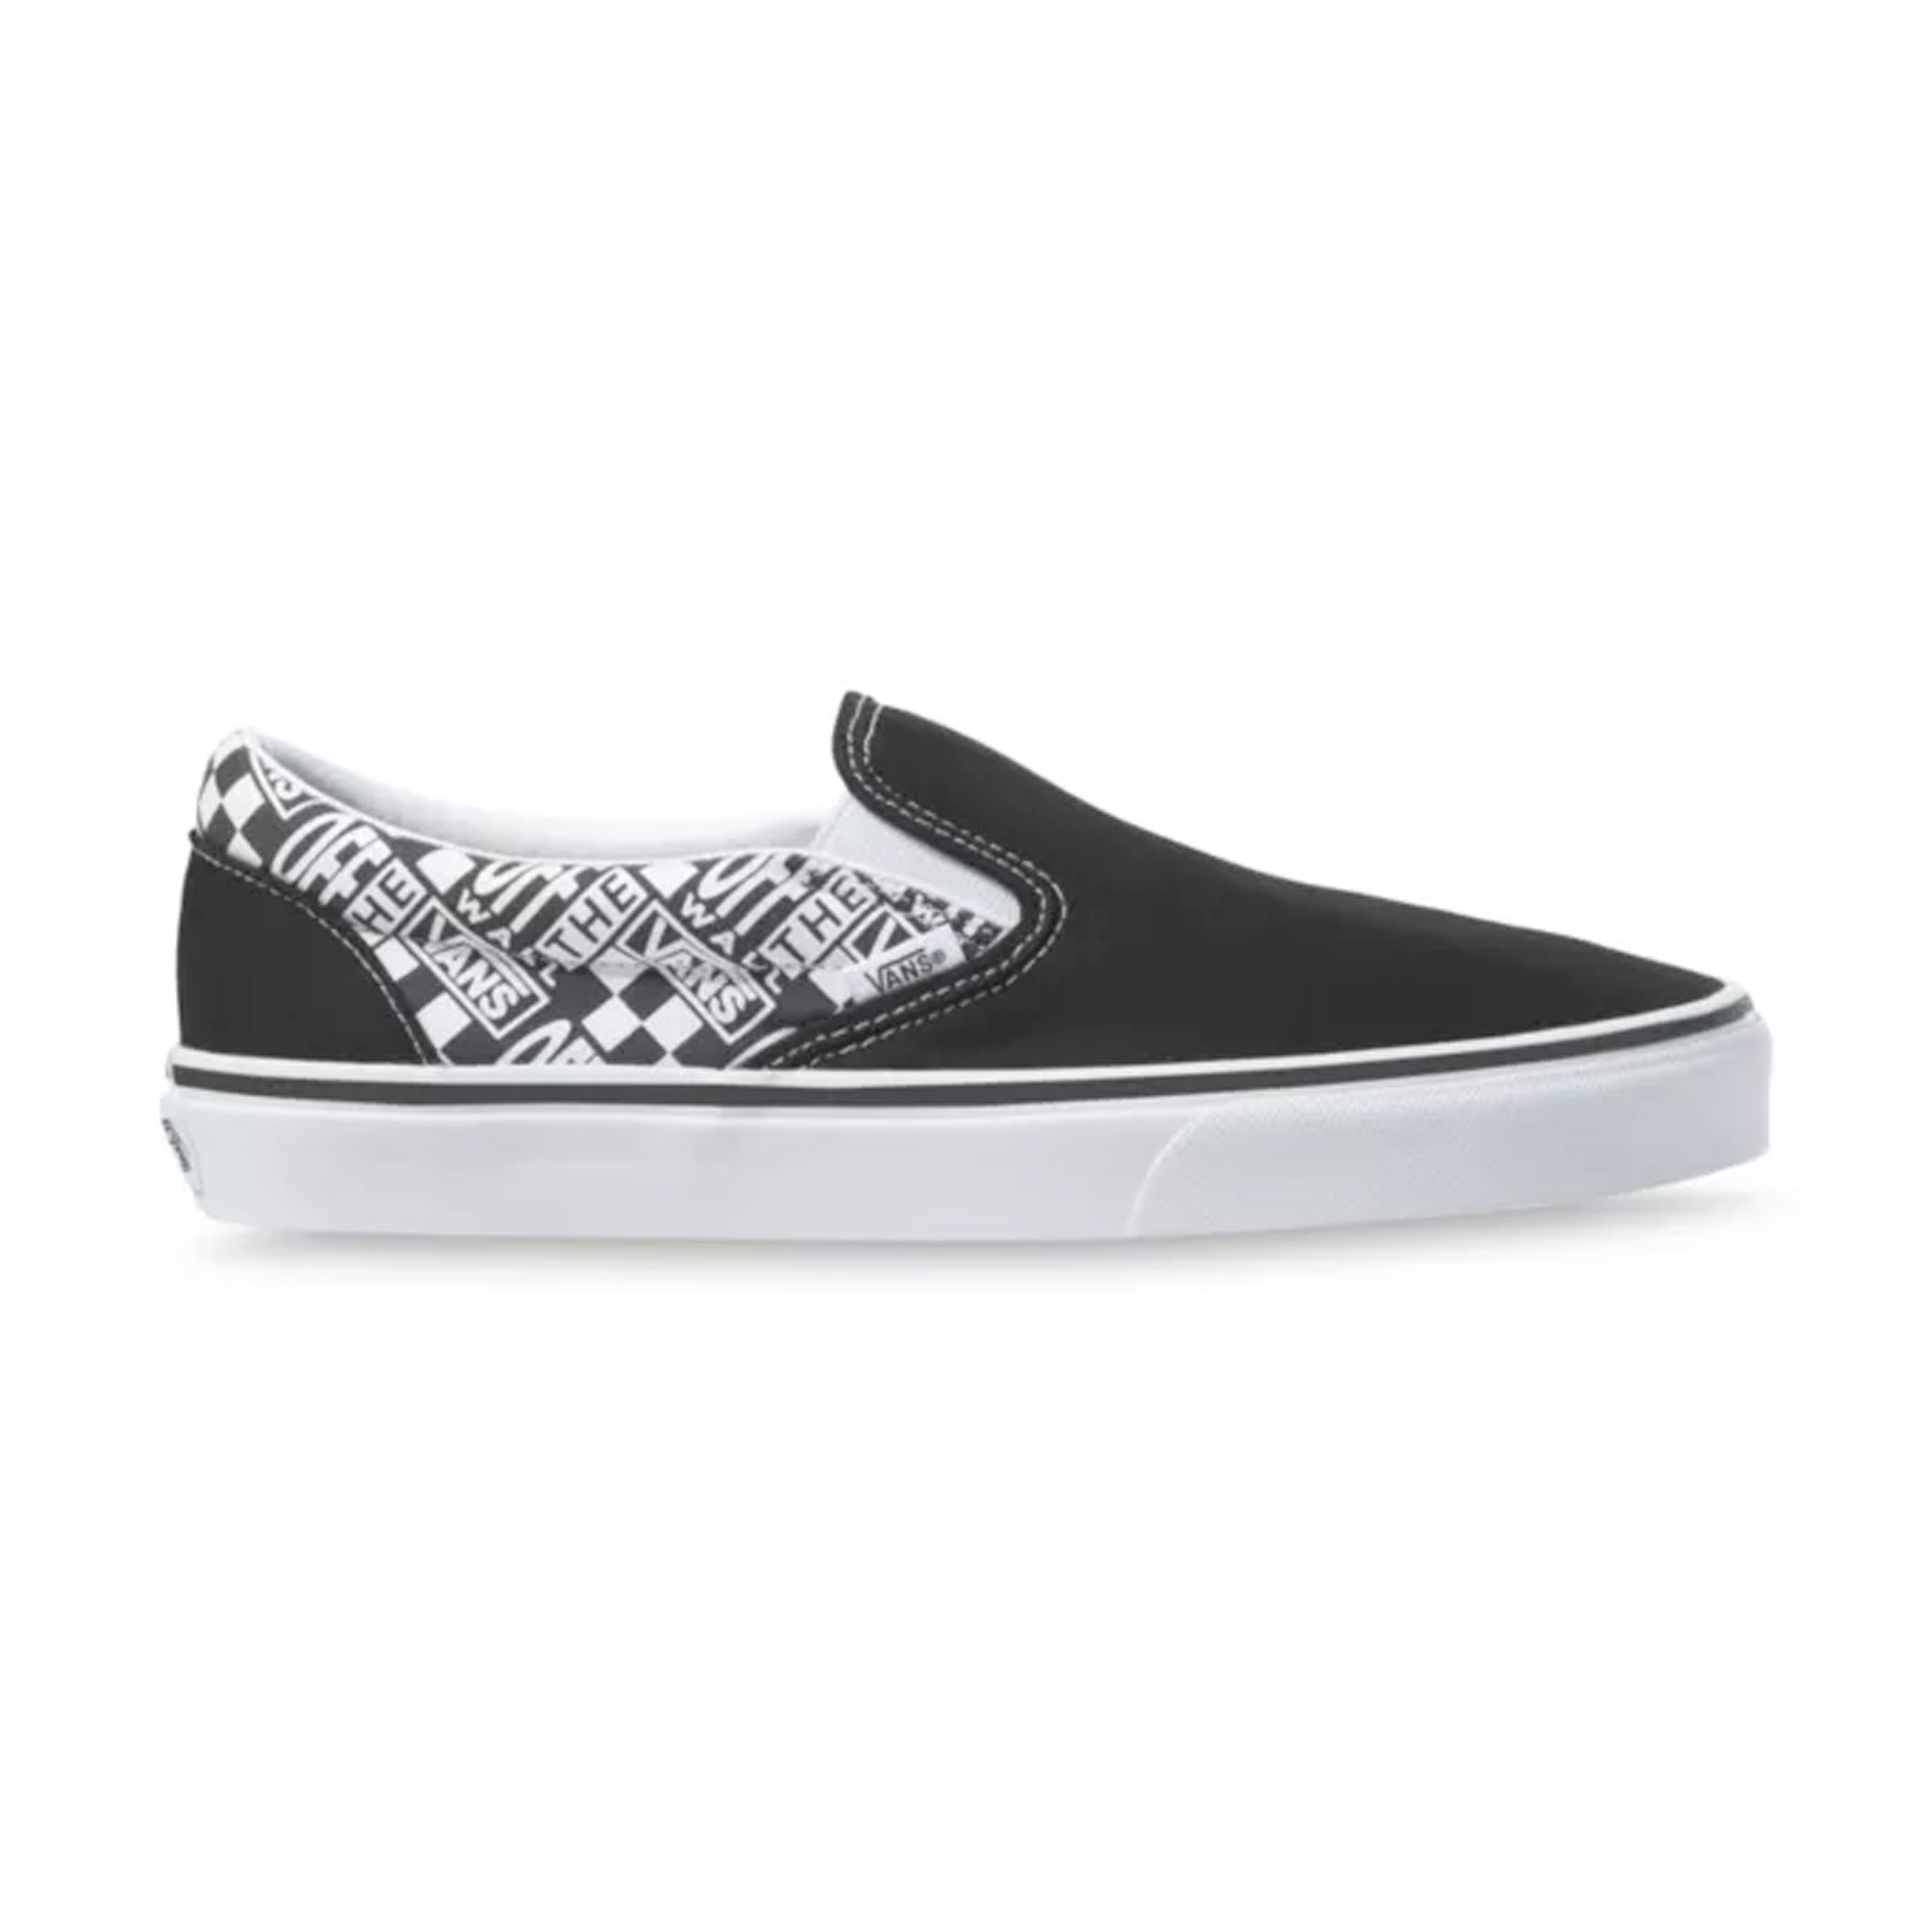 Vans Off The Wall Classic Slip-On Men's Shoes